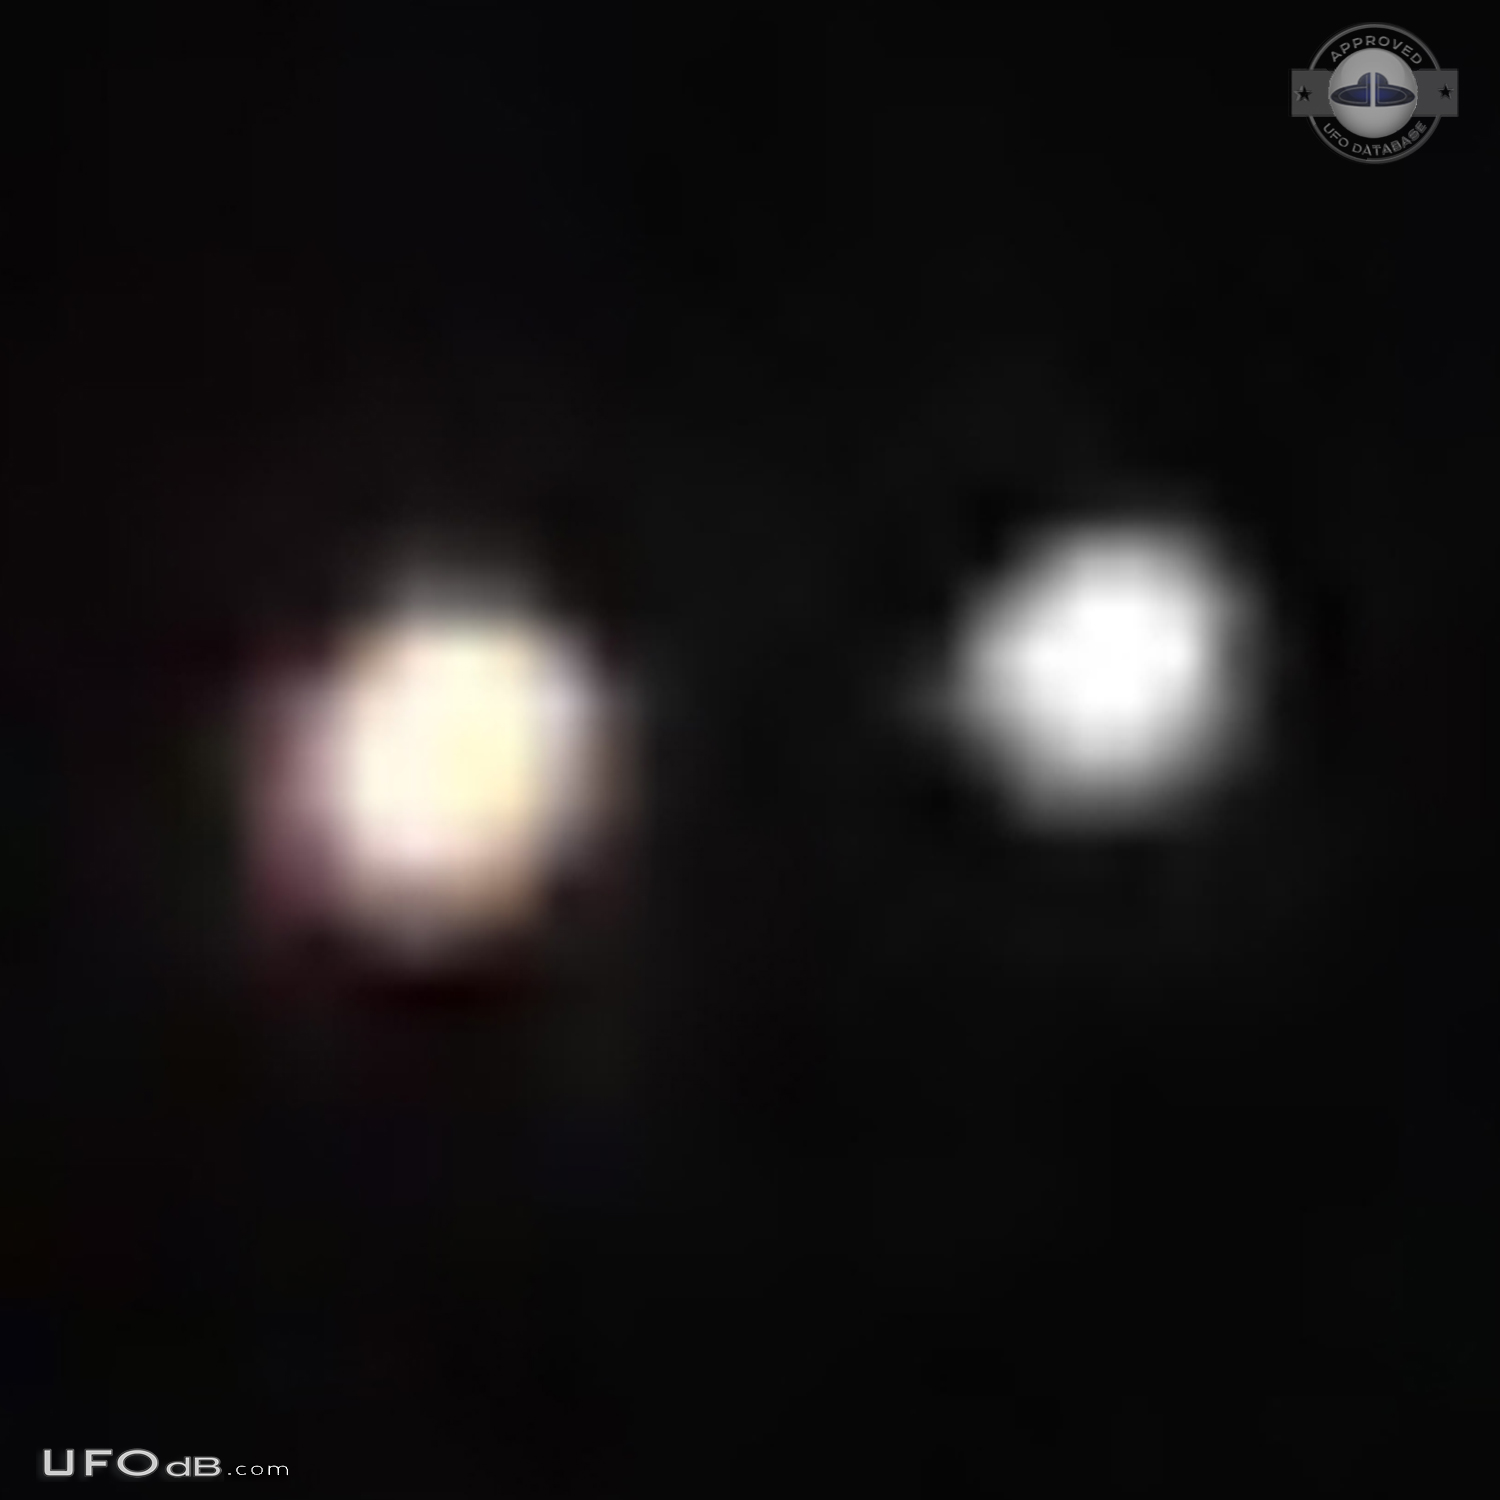 3 bright lights UFOs not too far up in the sky sitting still - Canada UFO Picture #674-3